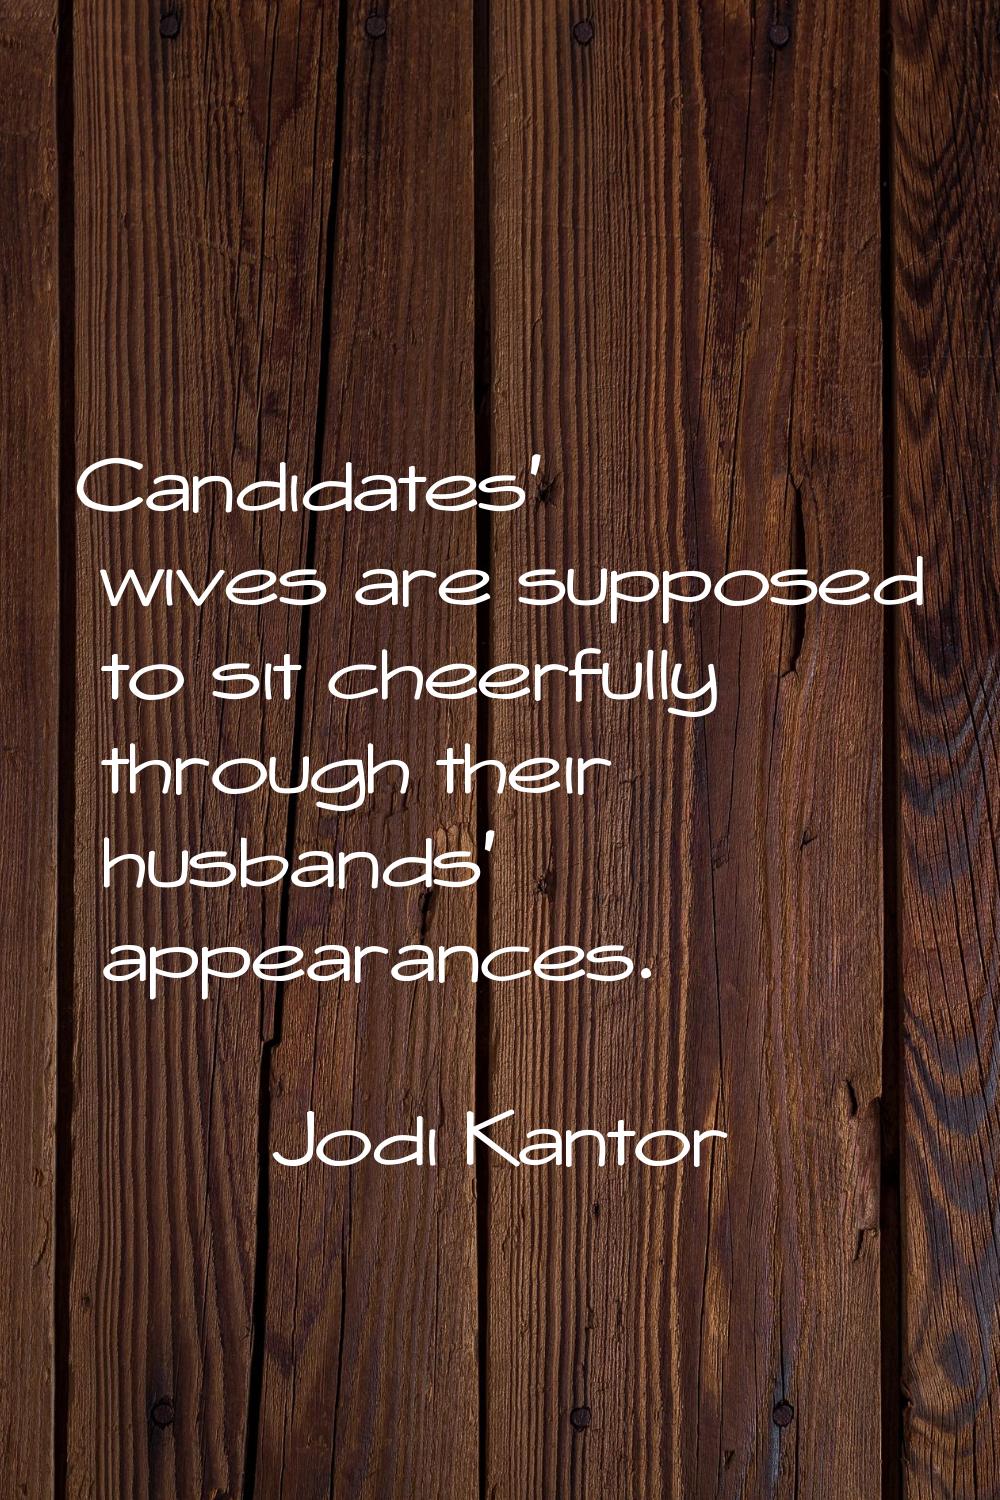 Candidates' wives are supposed to sit cheerfully through their husbands' appearances.